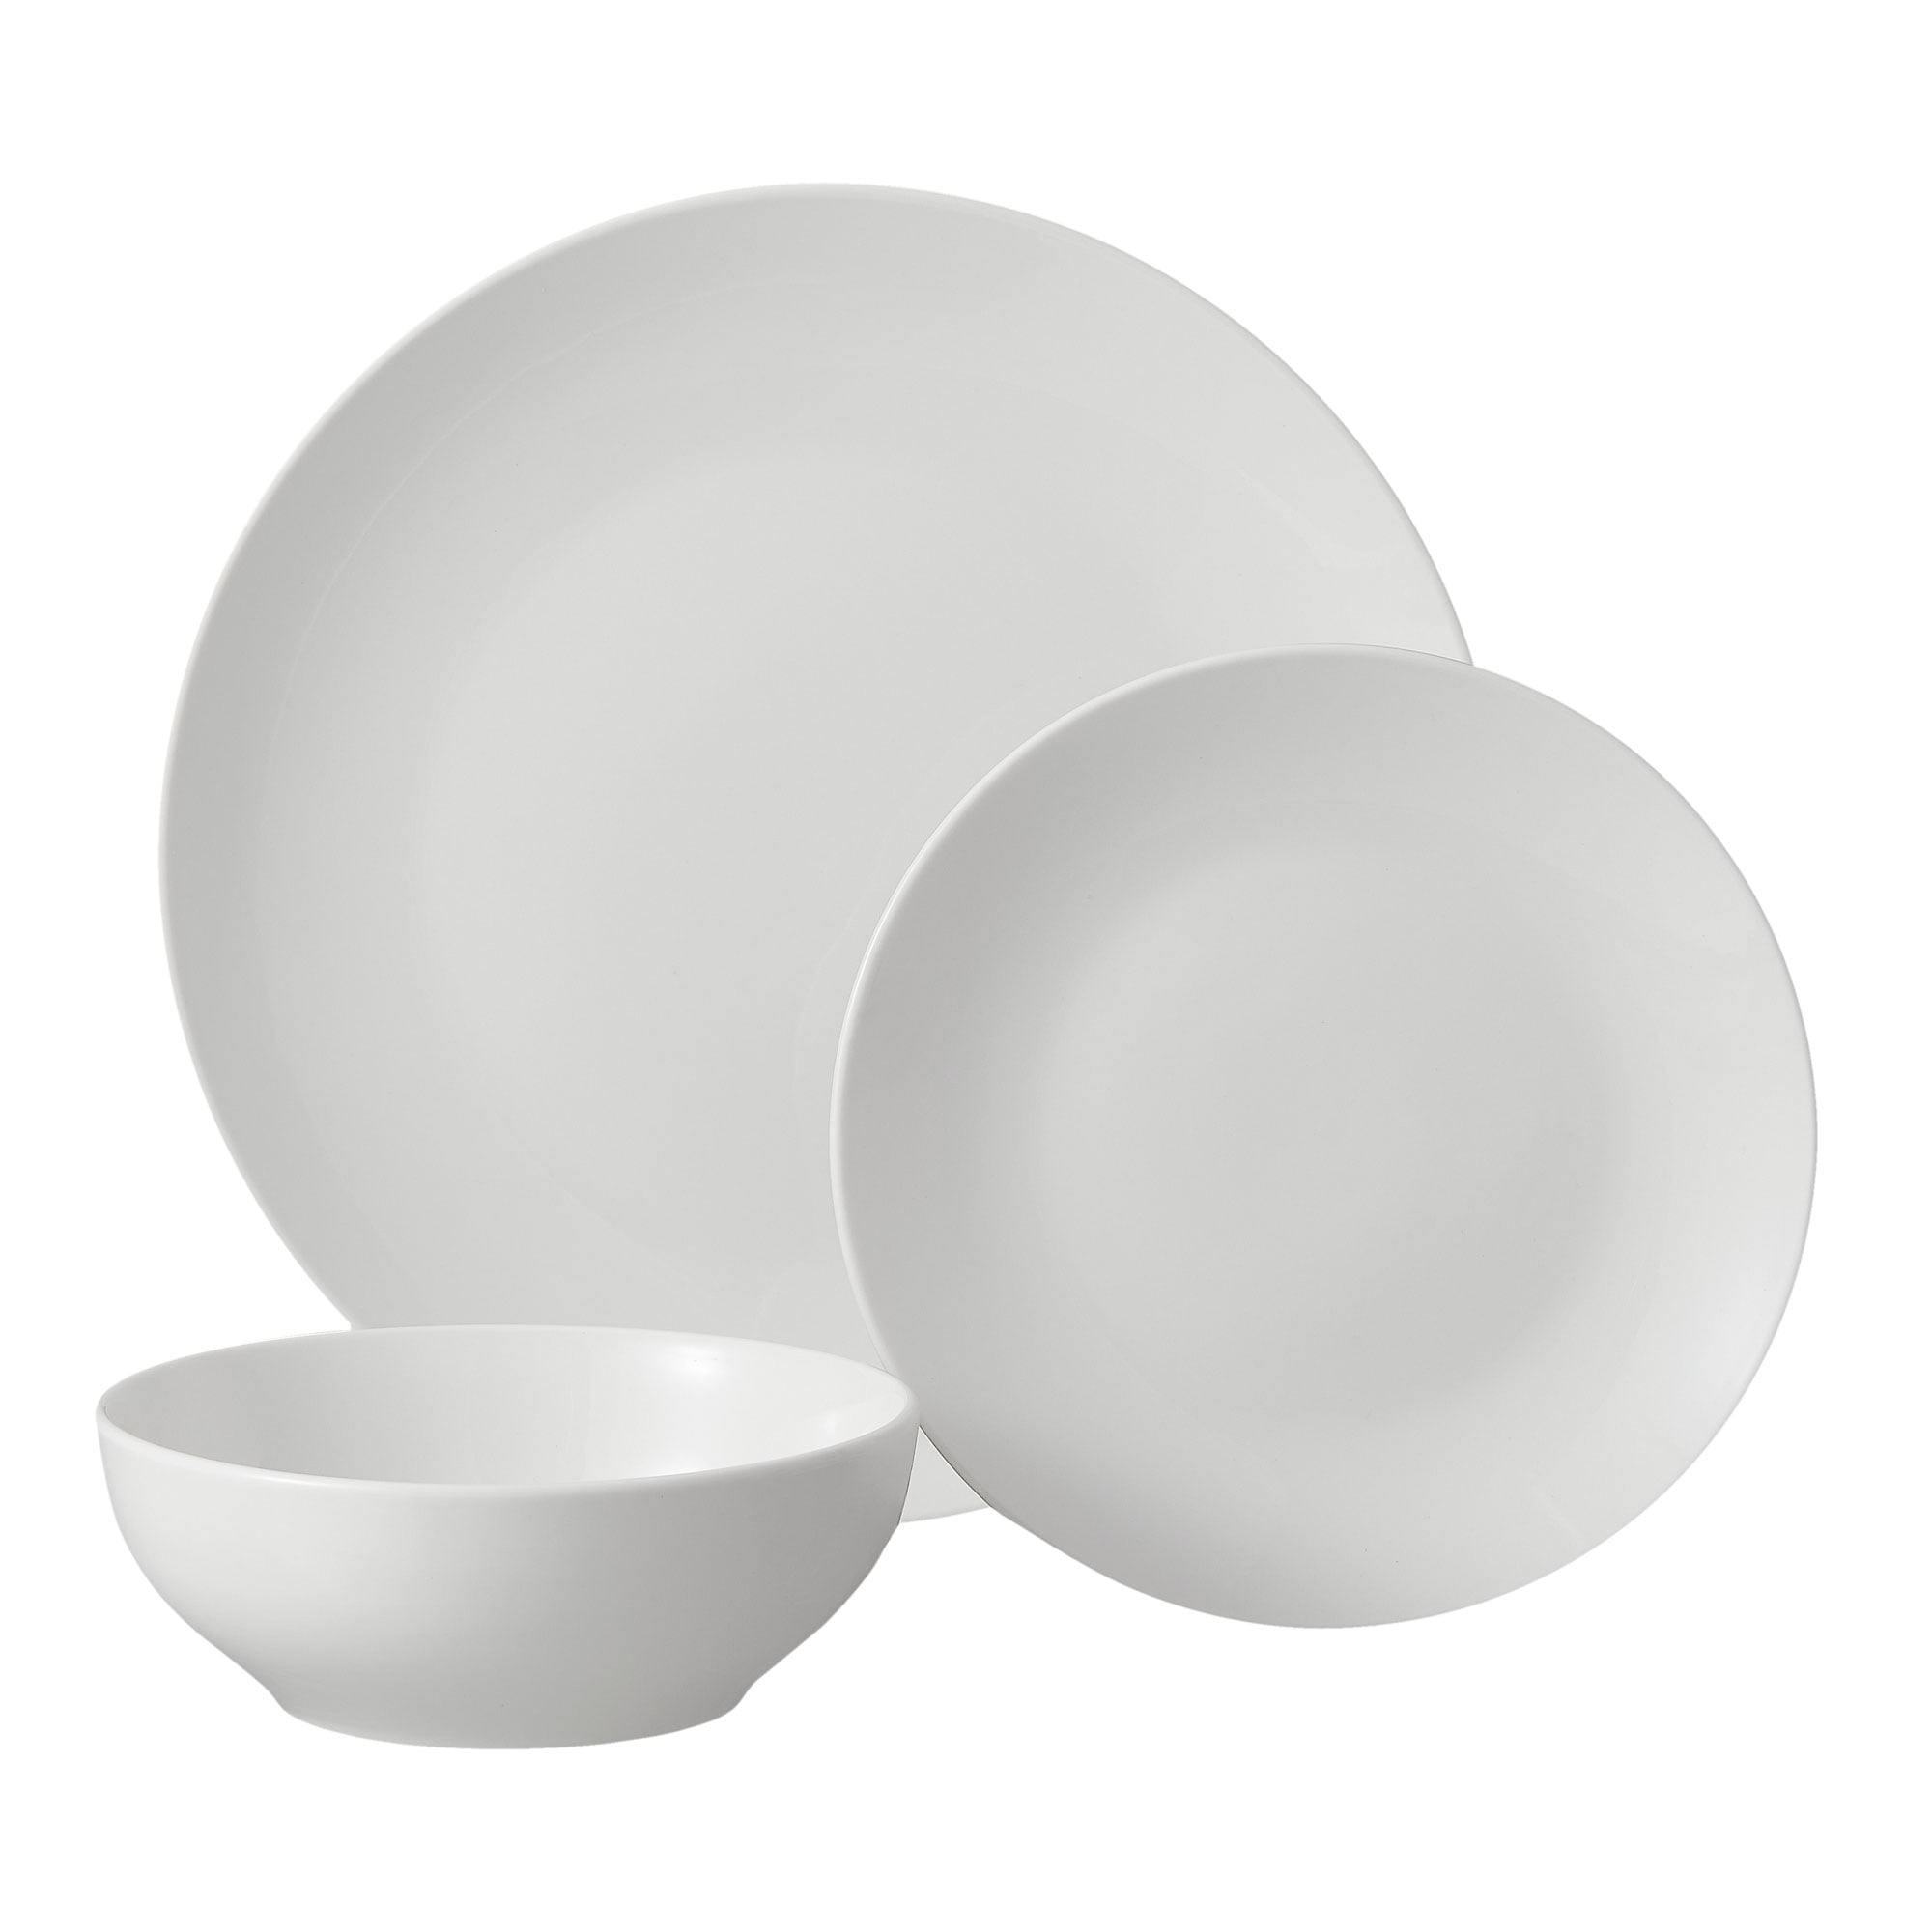 Plate, Bowl, 26 O Z cups , Grey Details about   Set 2   Mainstay Plastic Dinnerware Set 